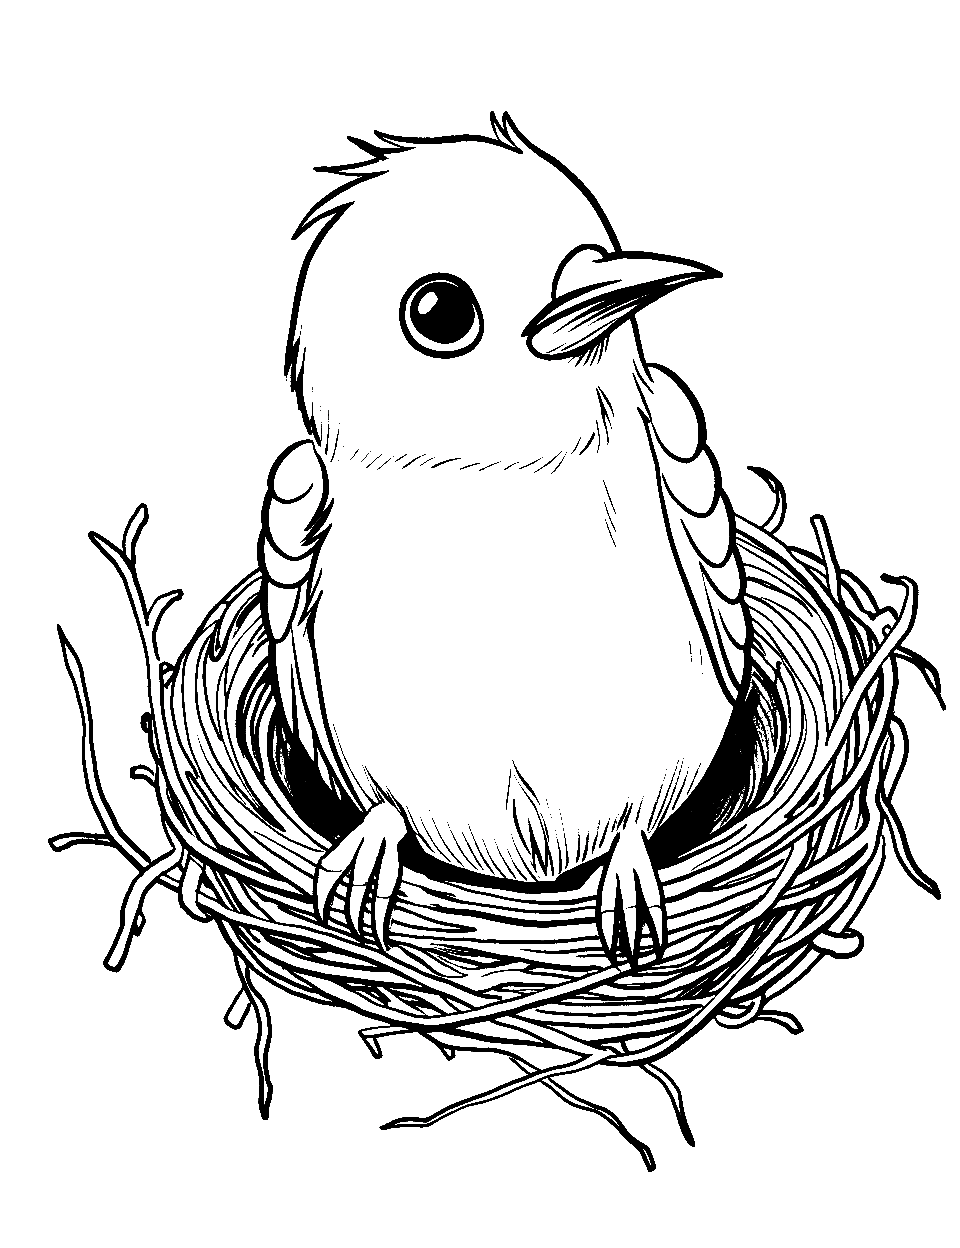 Baby Bird's Nesting Time Coloring Page - A baby bird eagerly awaiting its mother’s return to the nest.